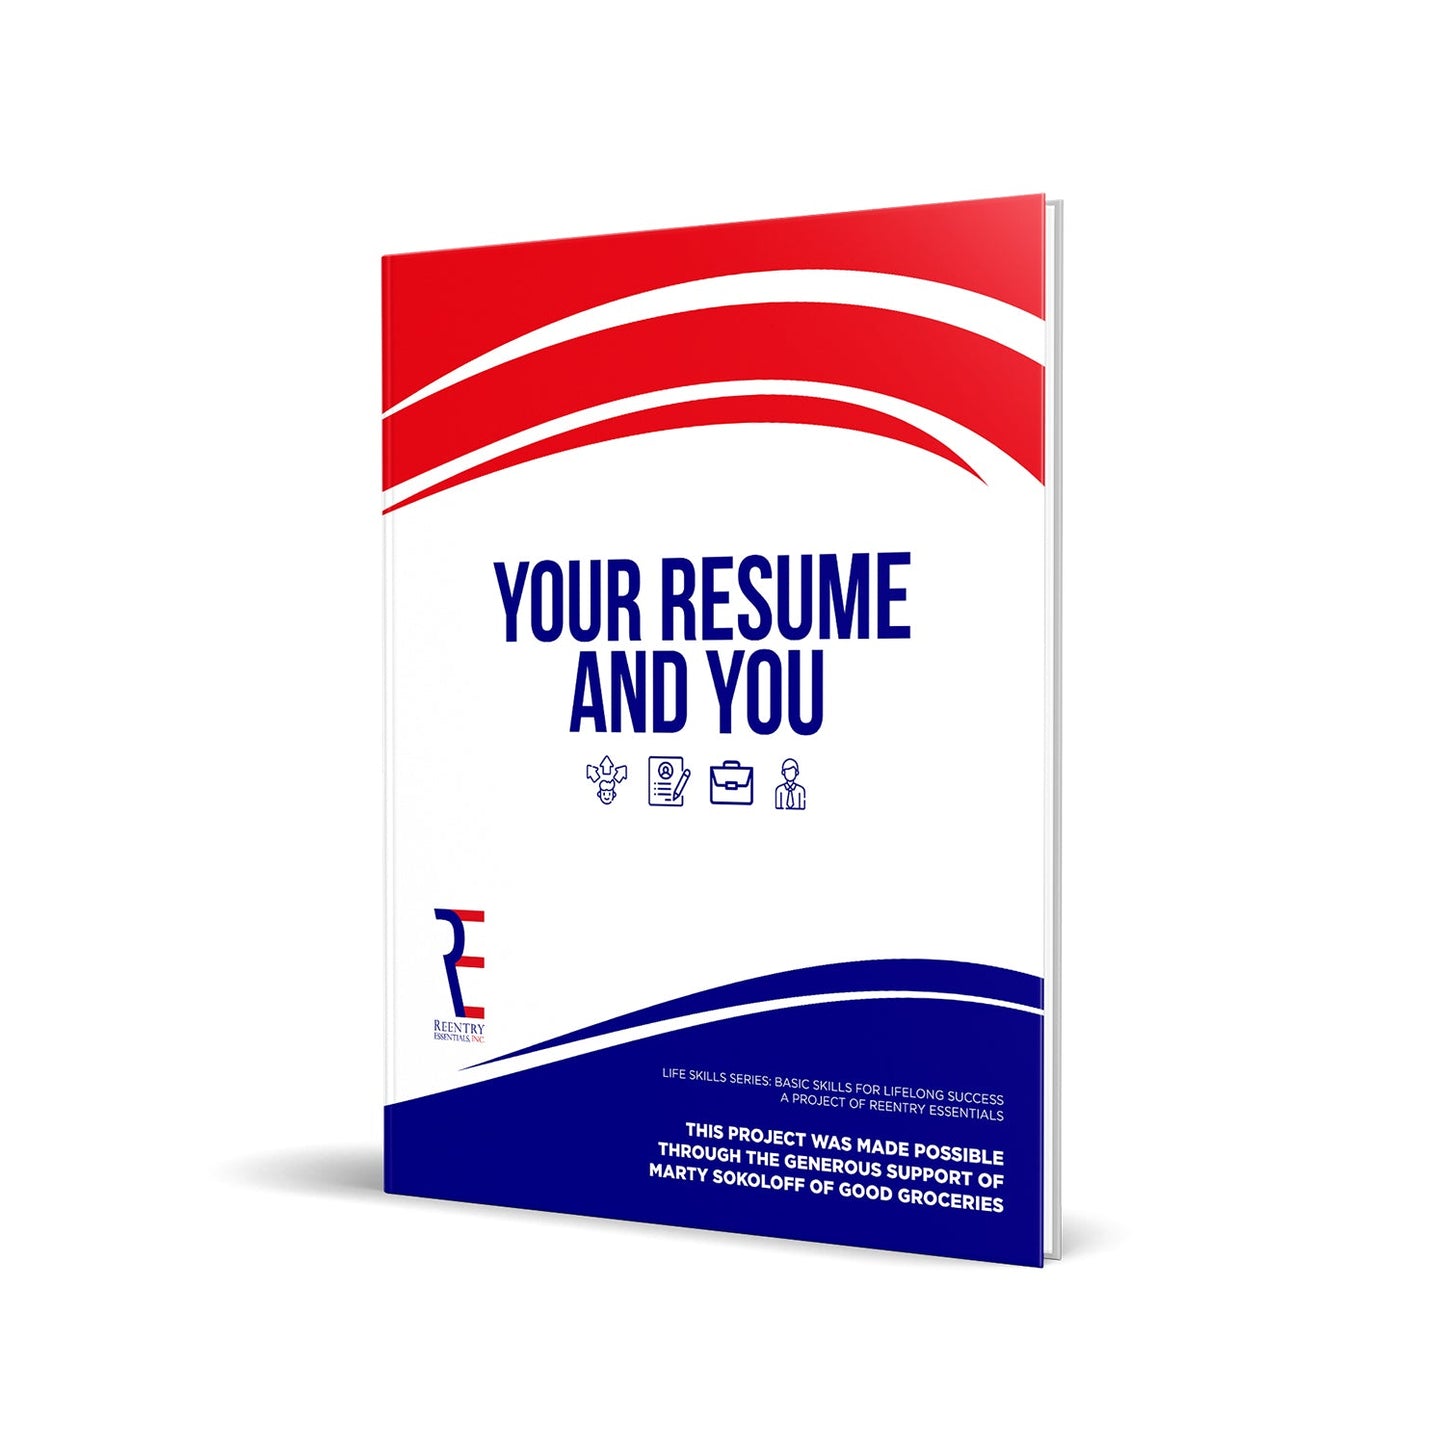 LSS - YOUR RESUME AND YOU